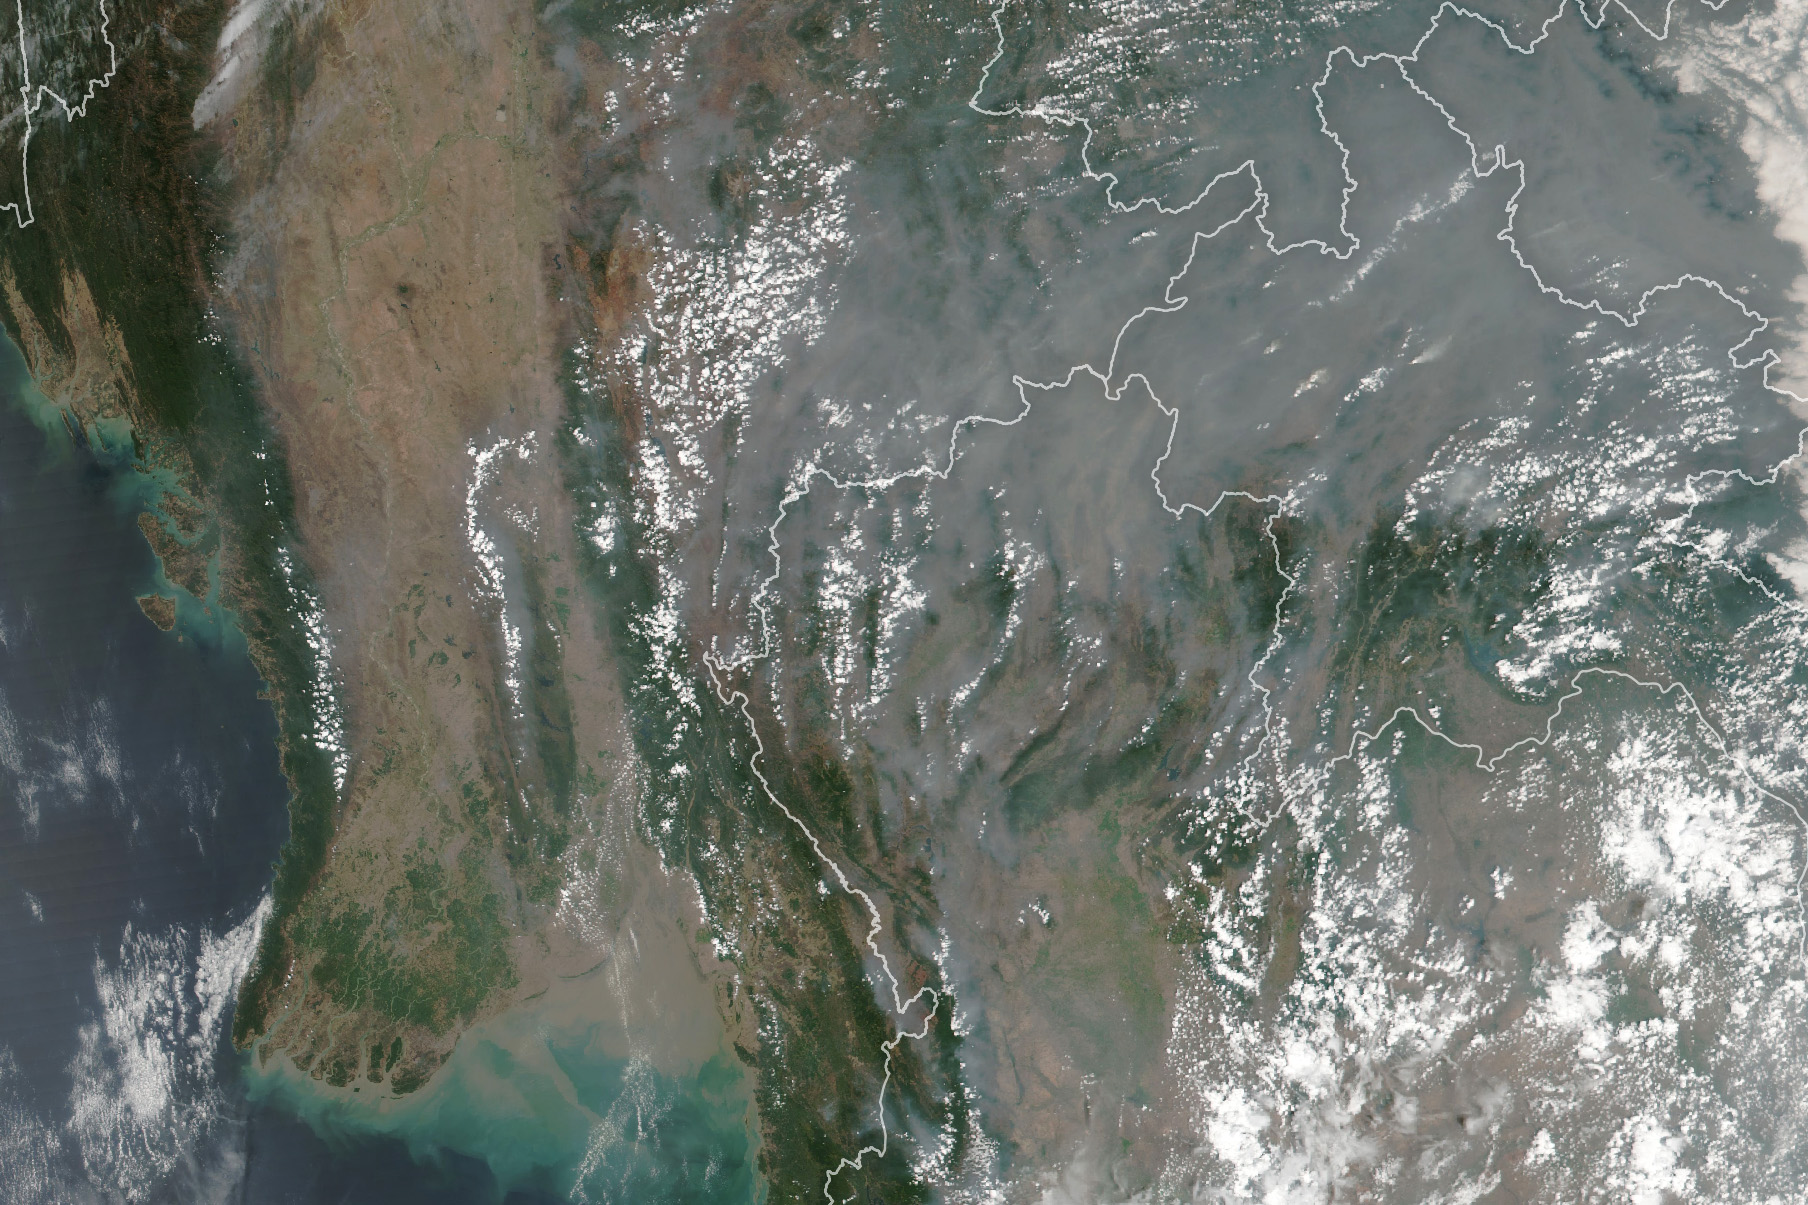 The satellite image shows a hazy day in Thailand during the region’s 2024 fire season. The image was captured by VIIRS (Visible Infrared Imaging Radiometer Suite) on the Suomi NPP (National Polar-orbiting Partnership) satellite on March 16.